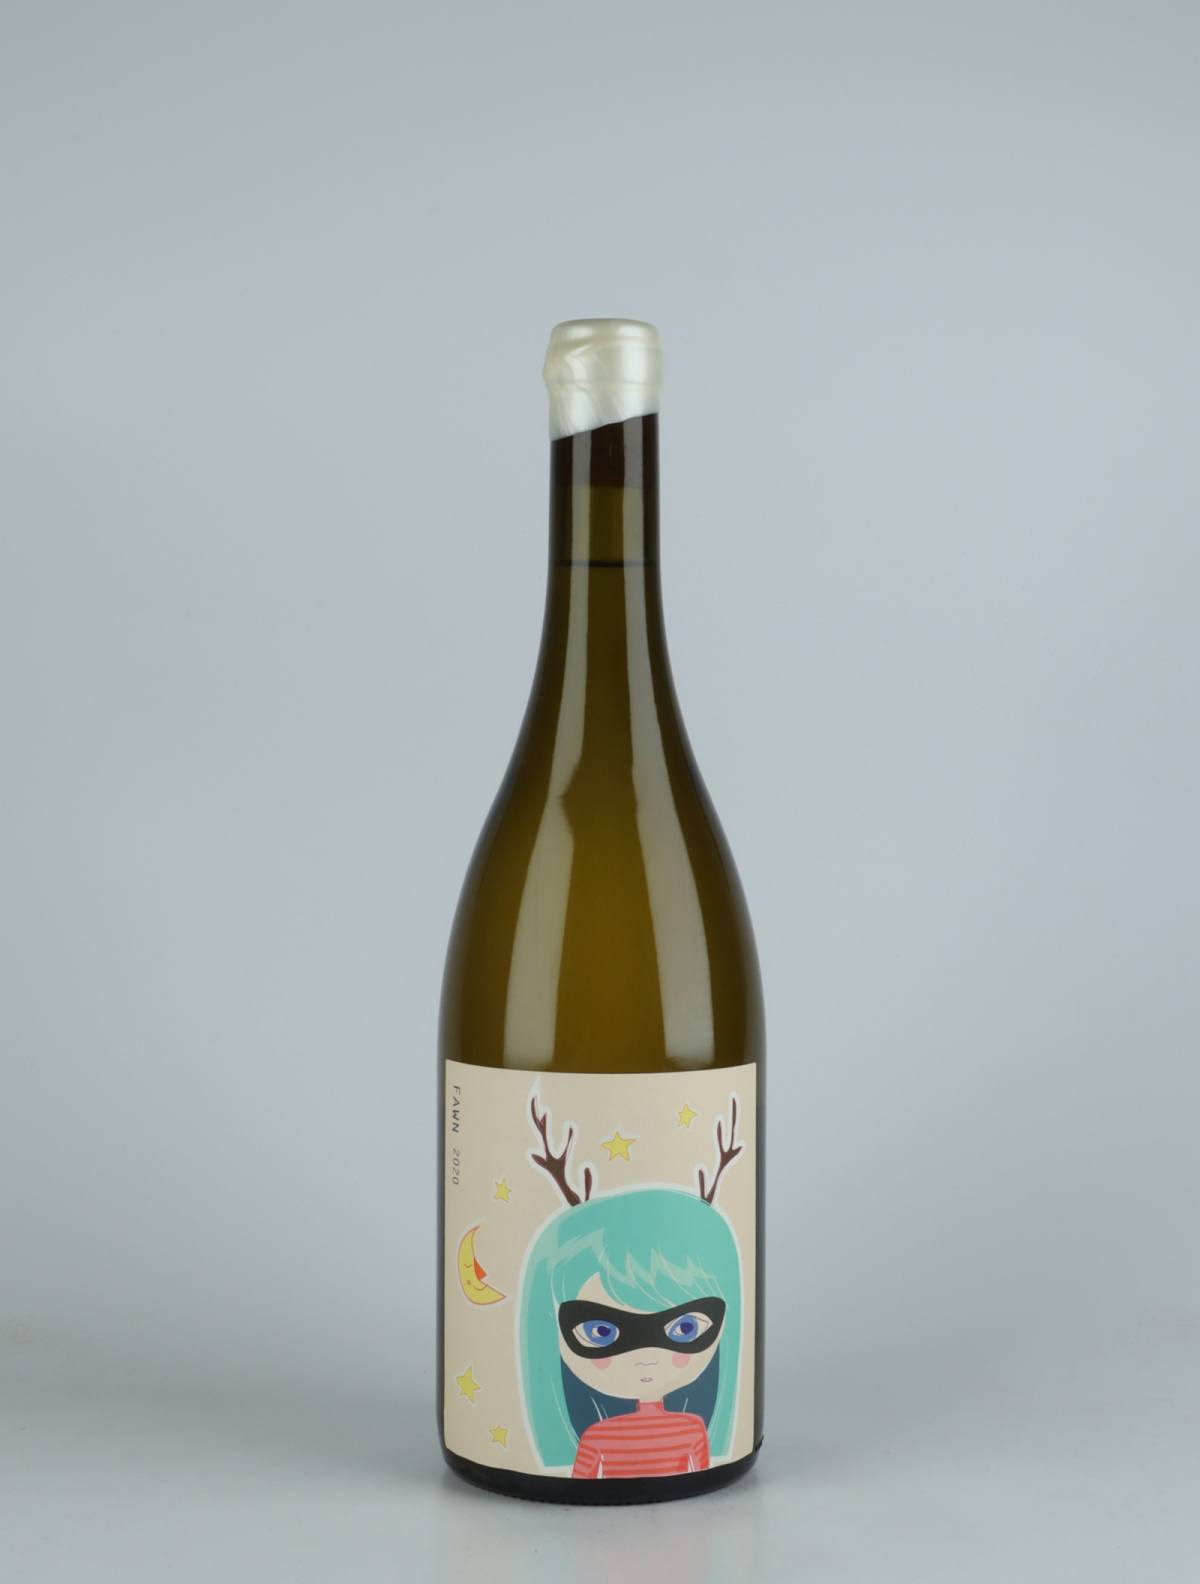 A bottle  Fawn White wine from The Other Right, Adelaide Hills in Australia